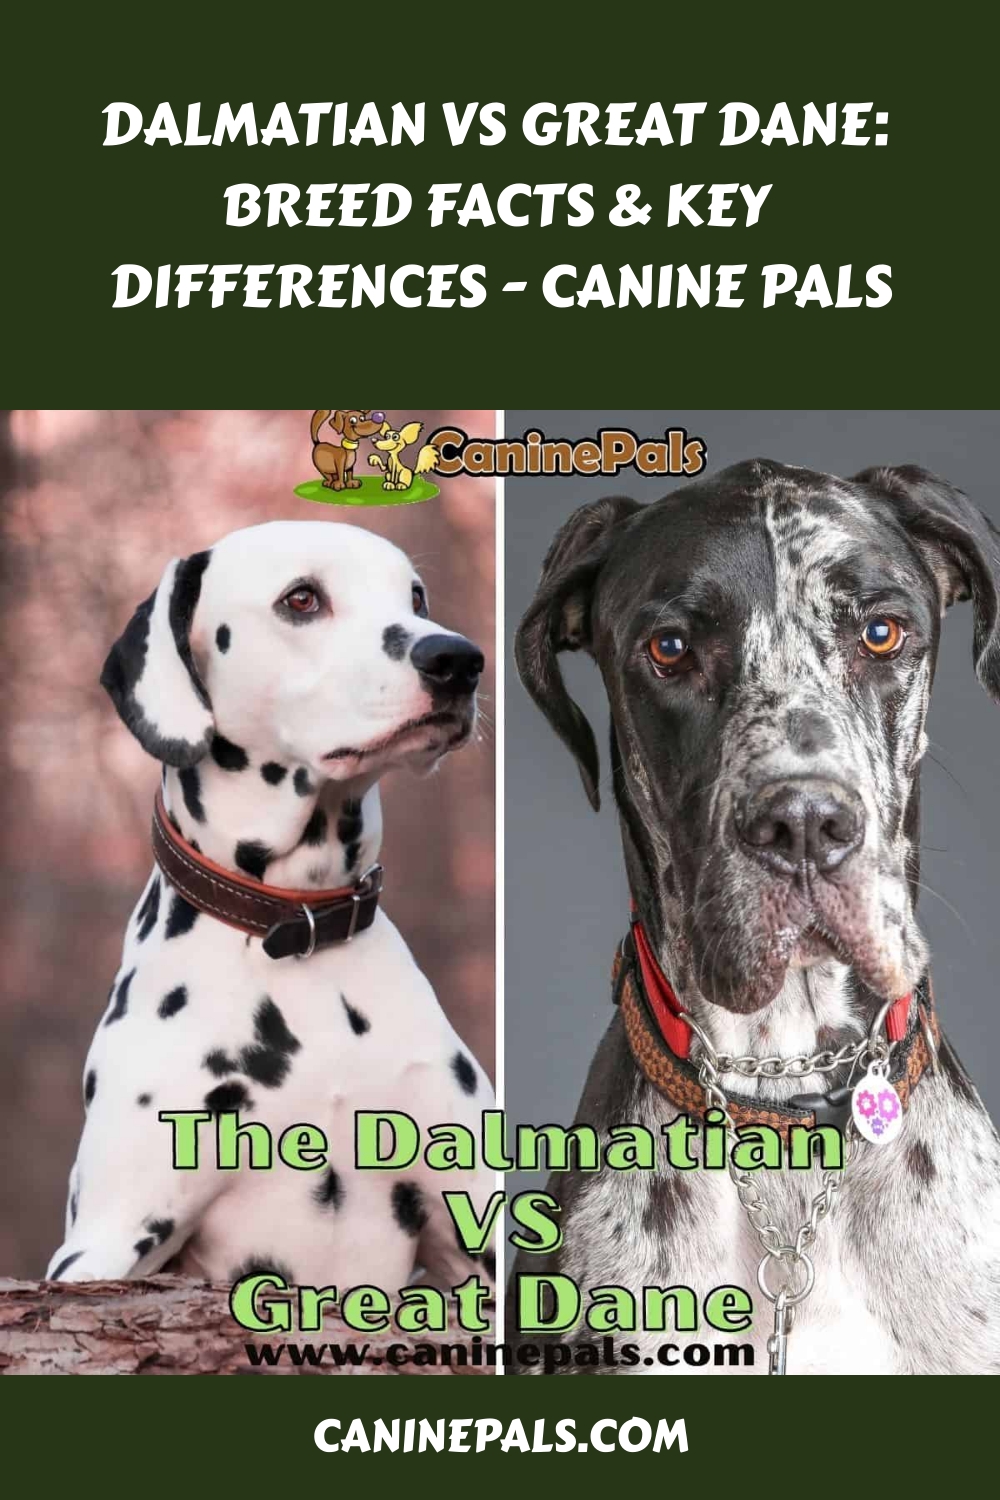 Dalmatian vs Great Dane: Breed Facts & Key Differences